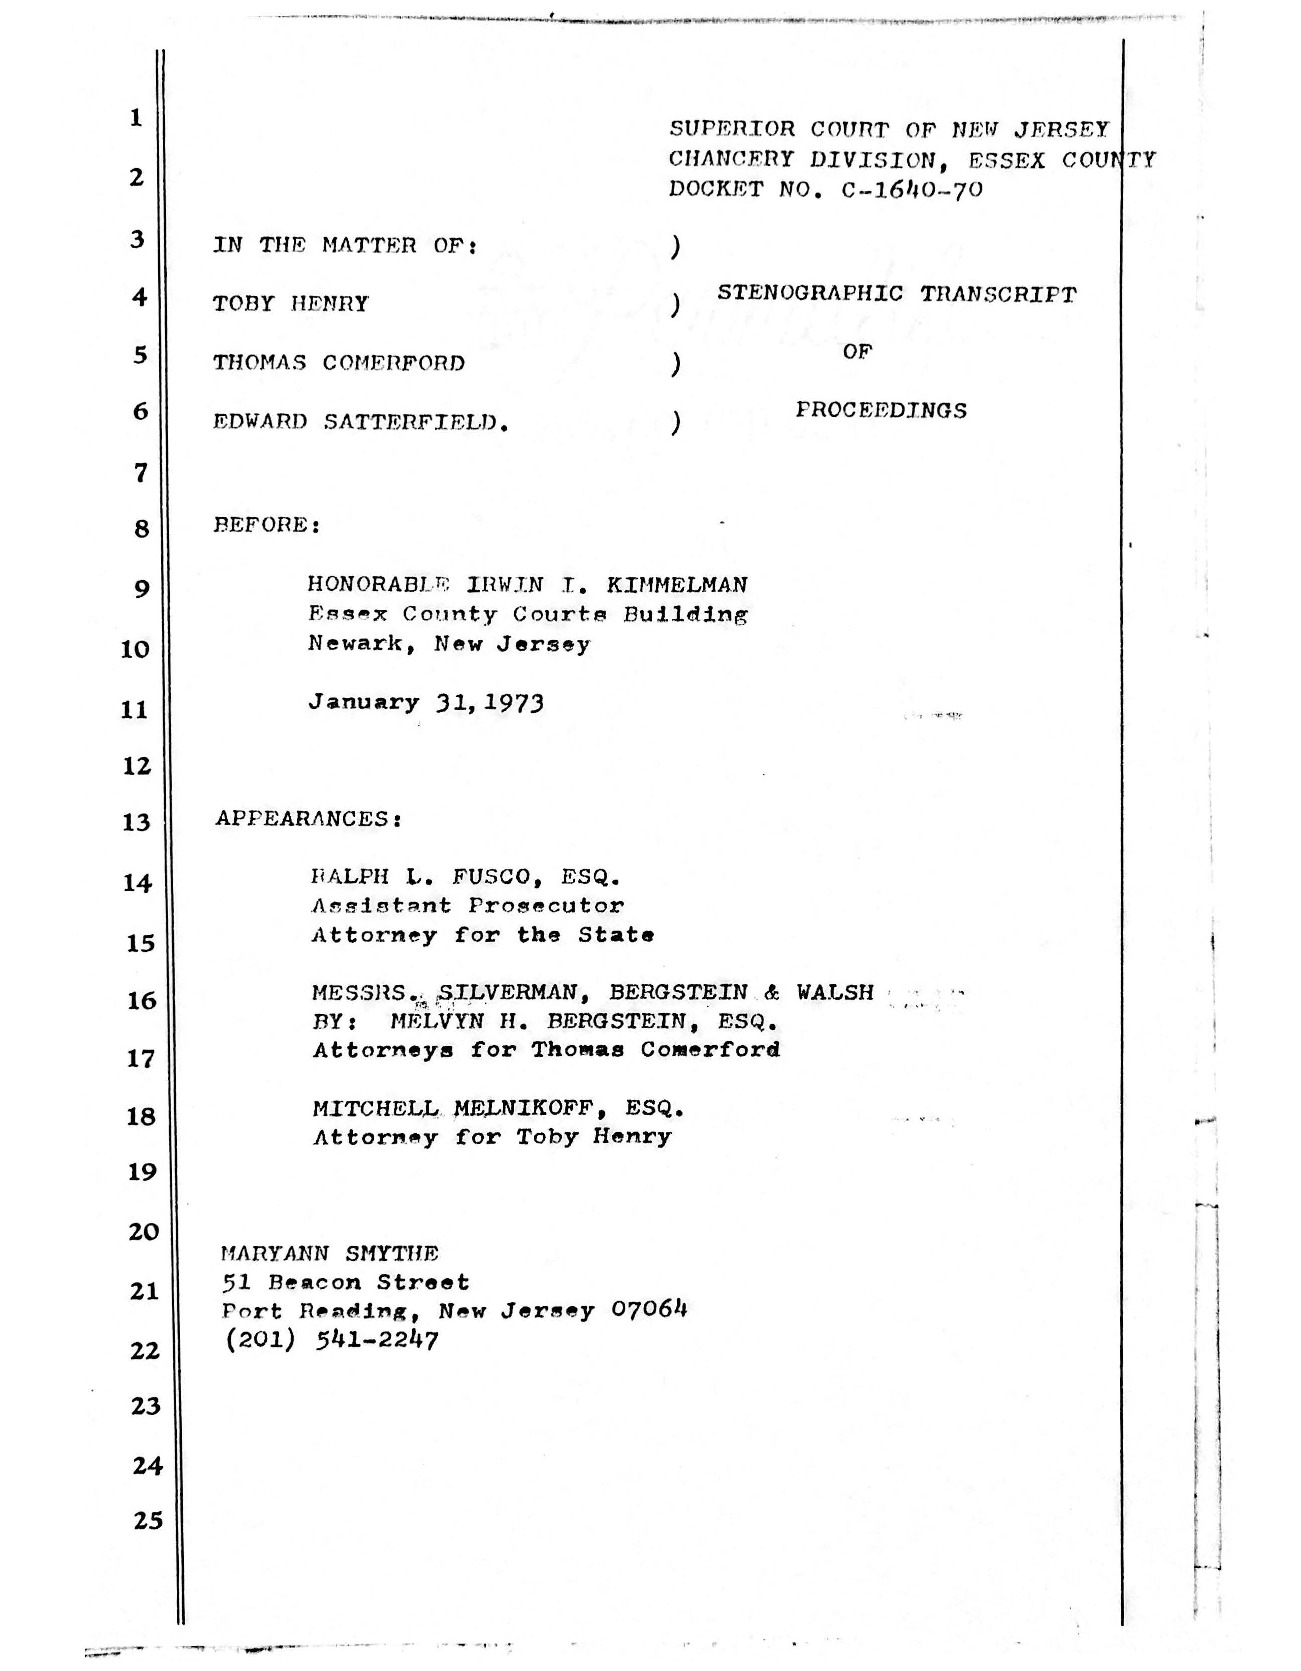 Court Transcript from Trial of Henry and Comerford (1973)